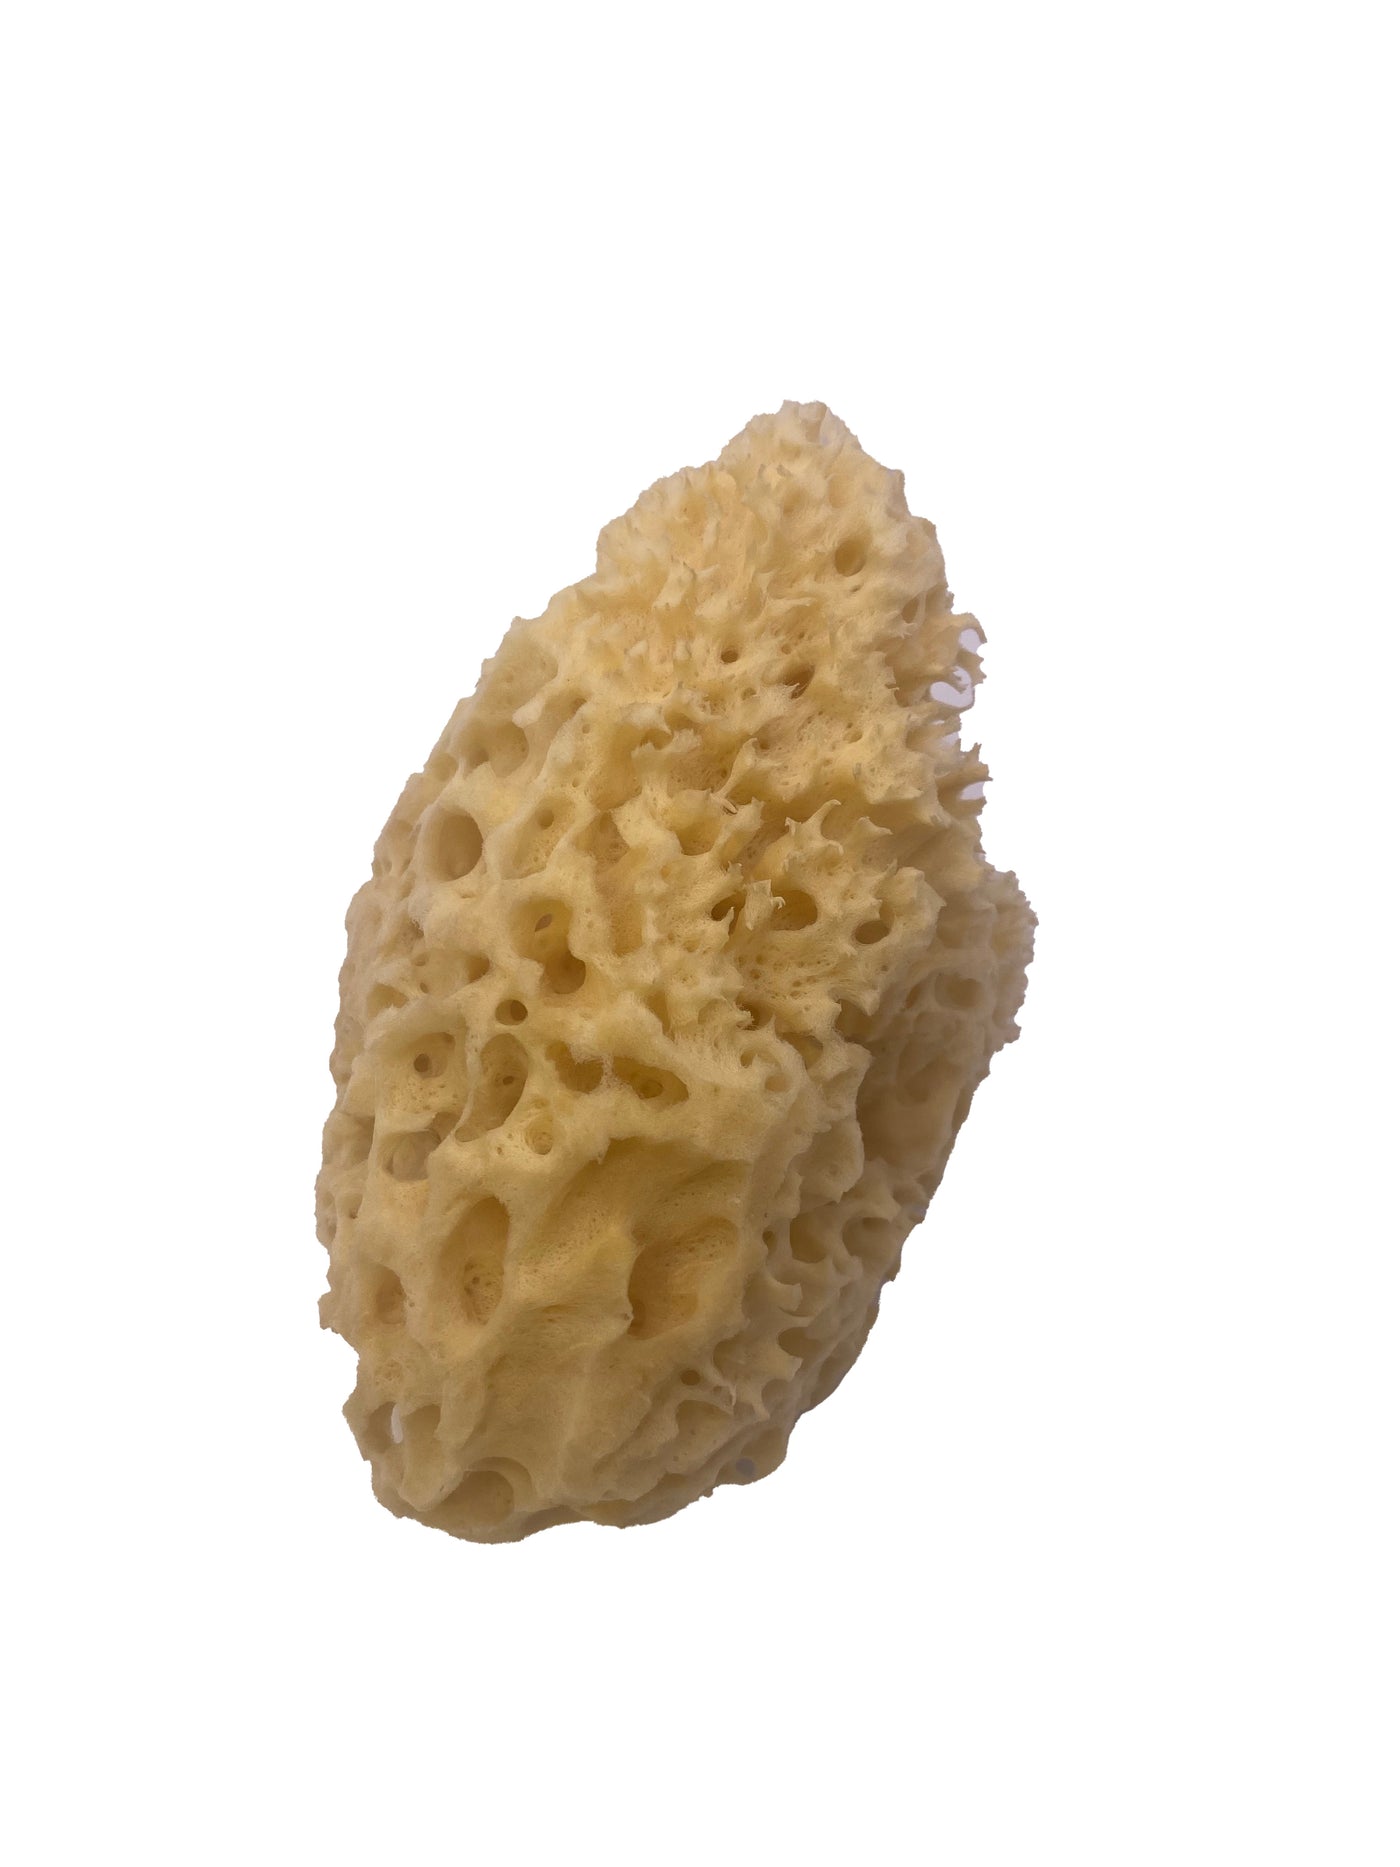 Natural Sponge Honeycomb from Kalymnos 5.0 - 5.5 inches